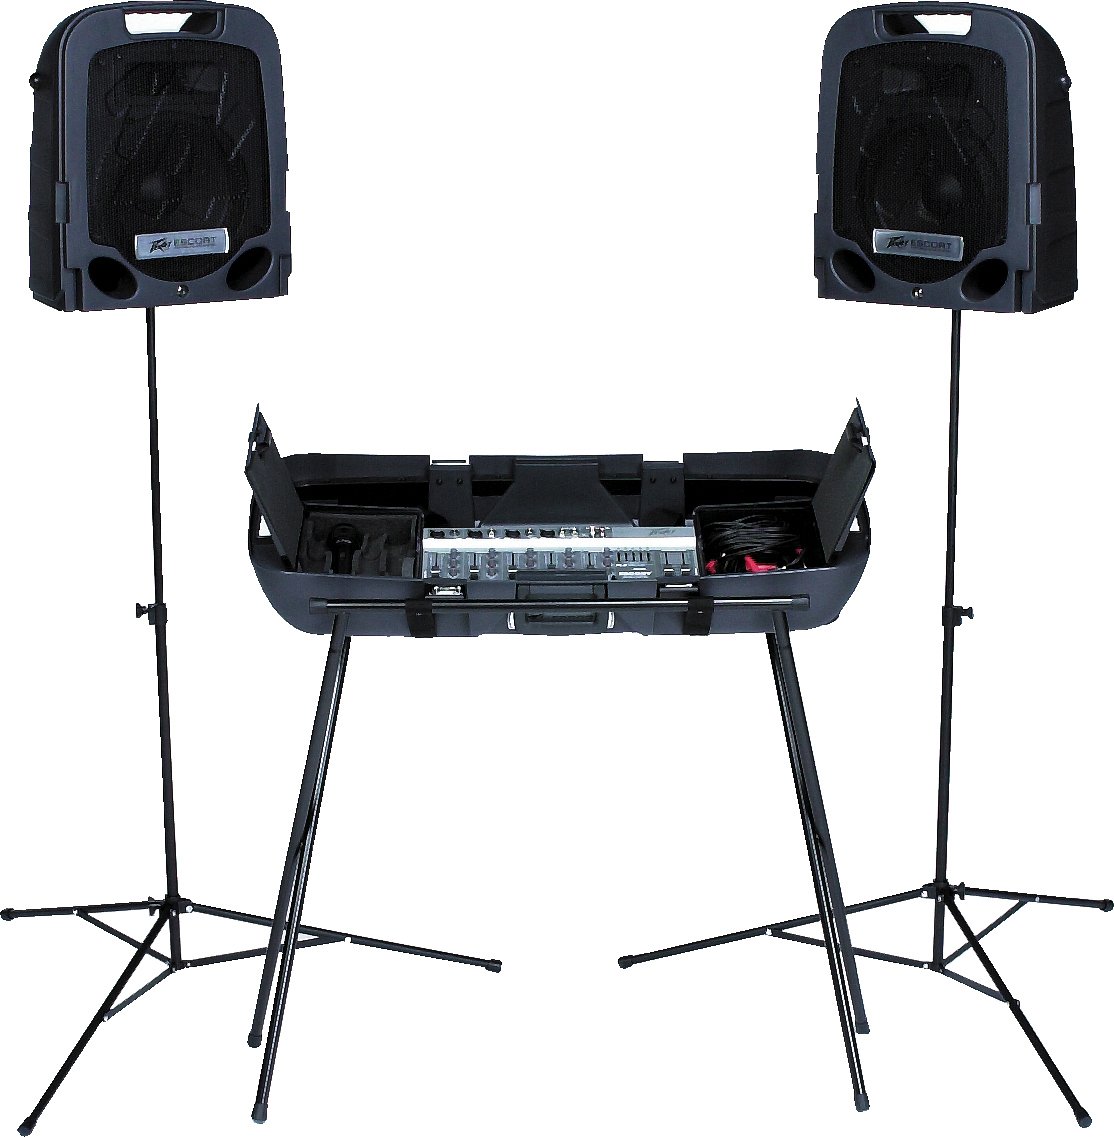 Peavey Escort Complete Portable Sound System at zZounds